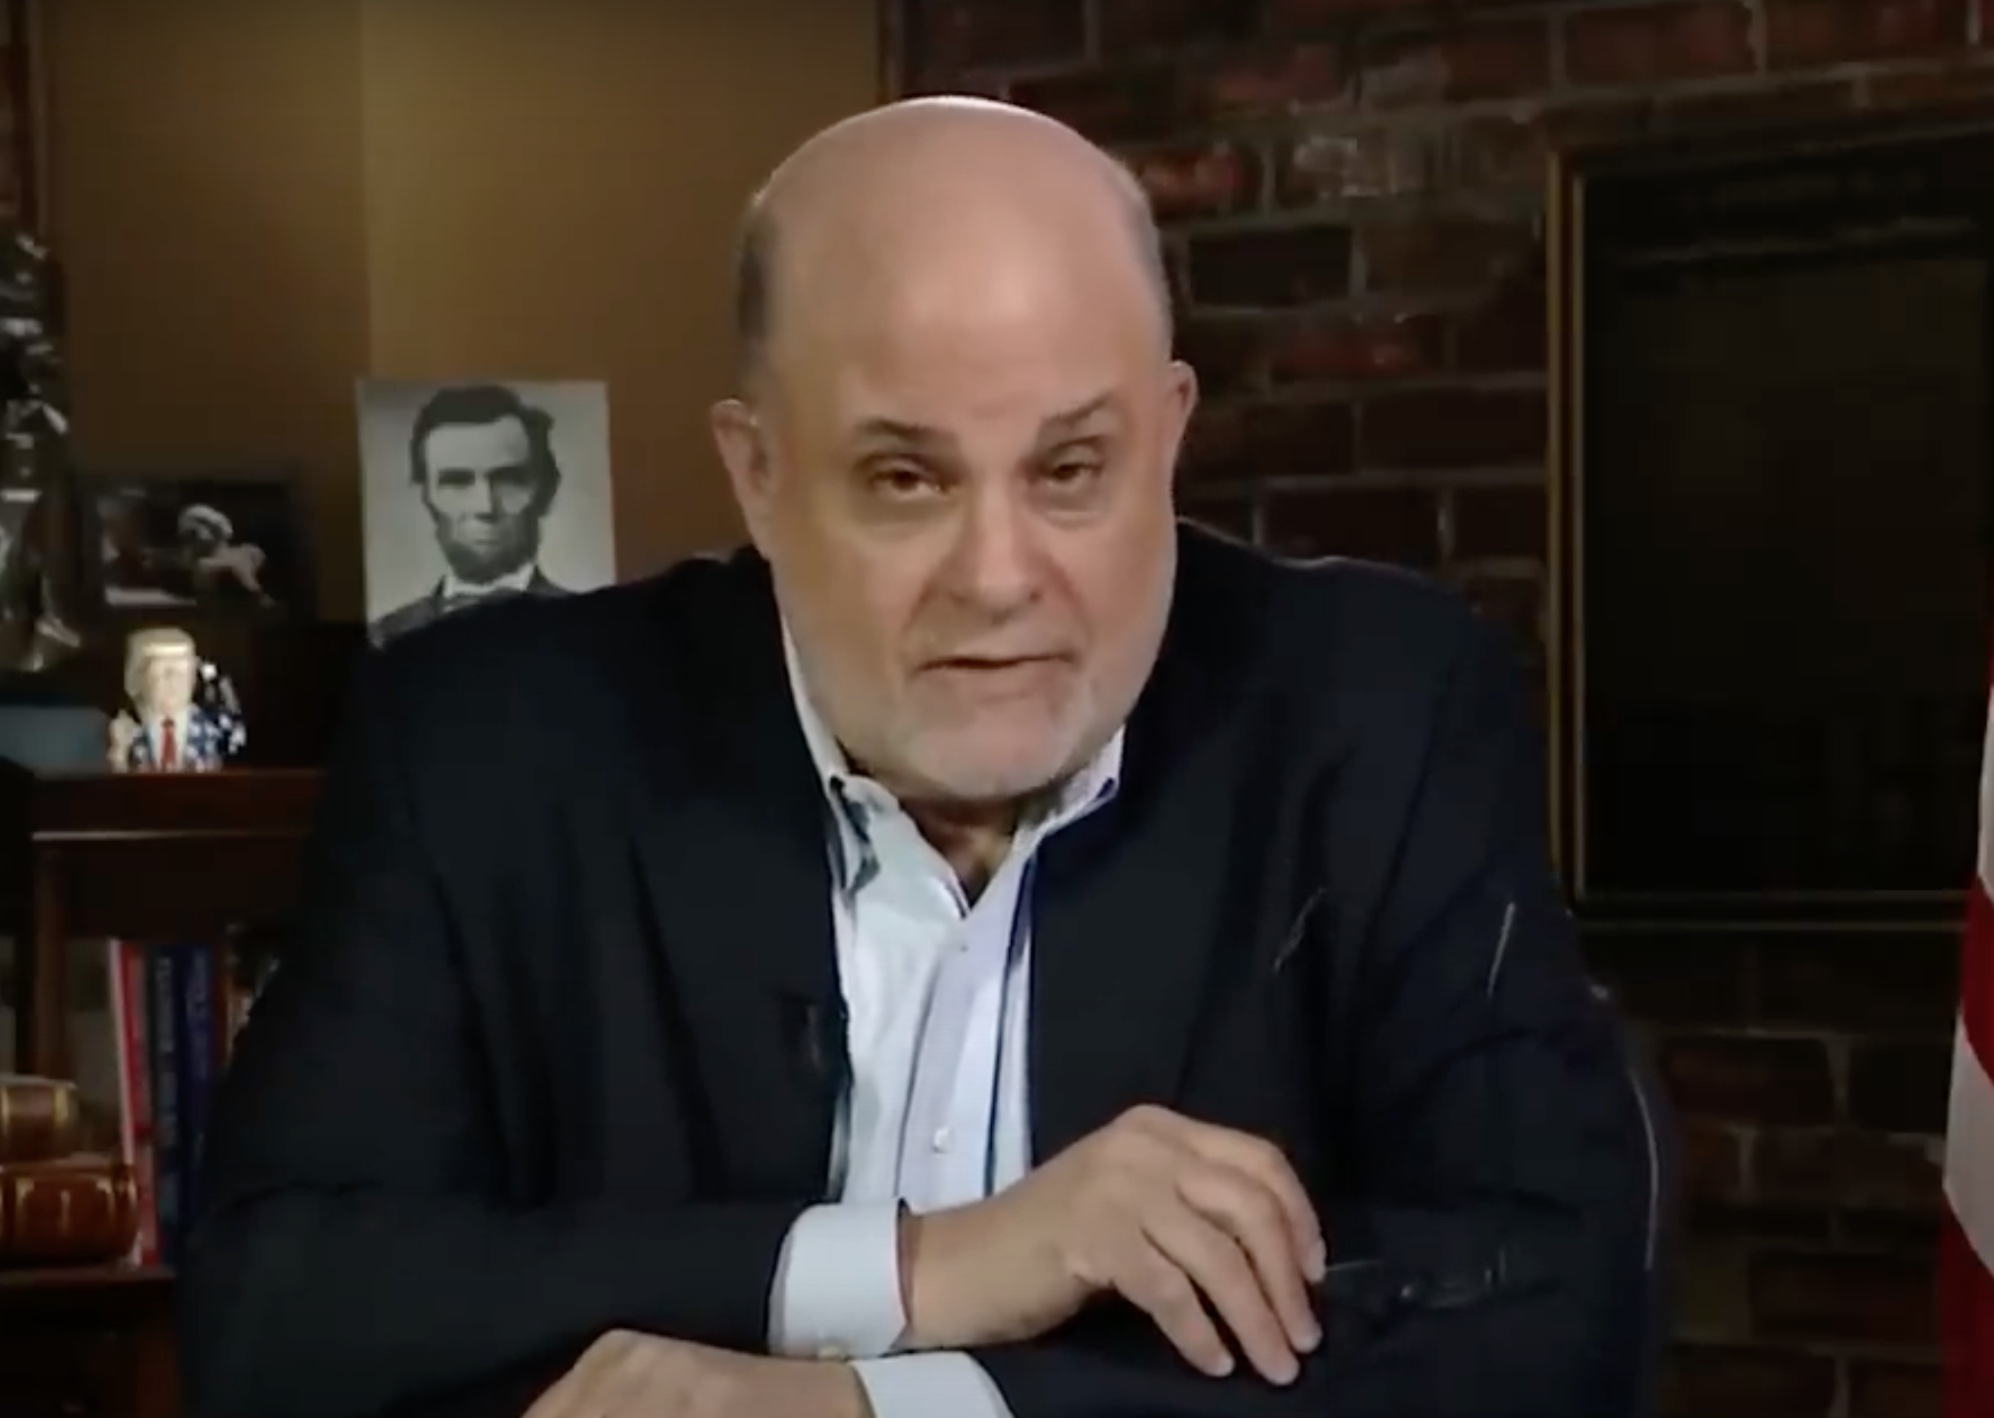 Fox News Host Mark Levin Gets Blasted by MAGA Twitter After Posting Link to DeSantis Donations Page